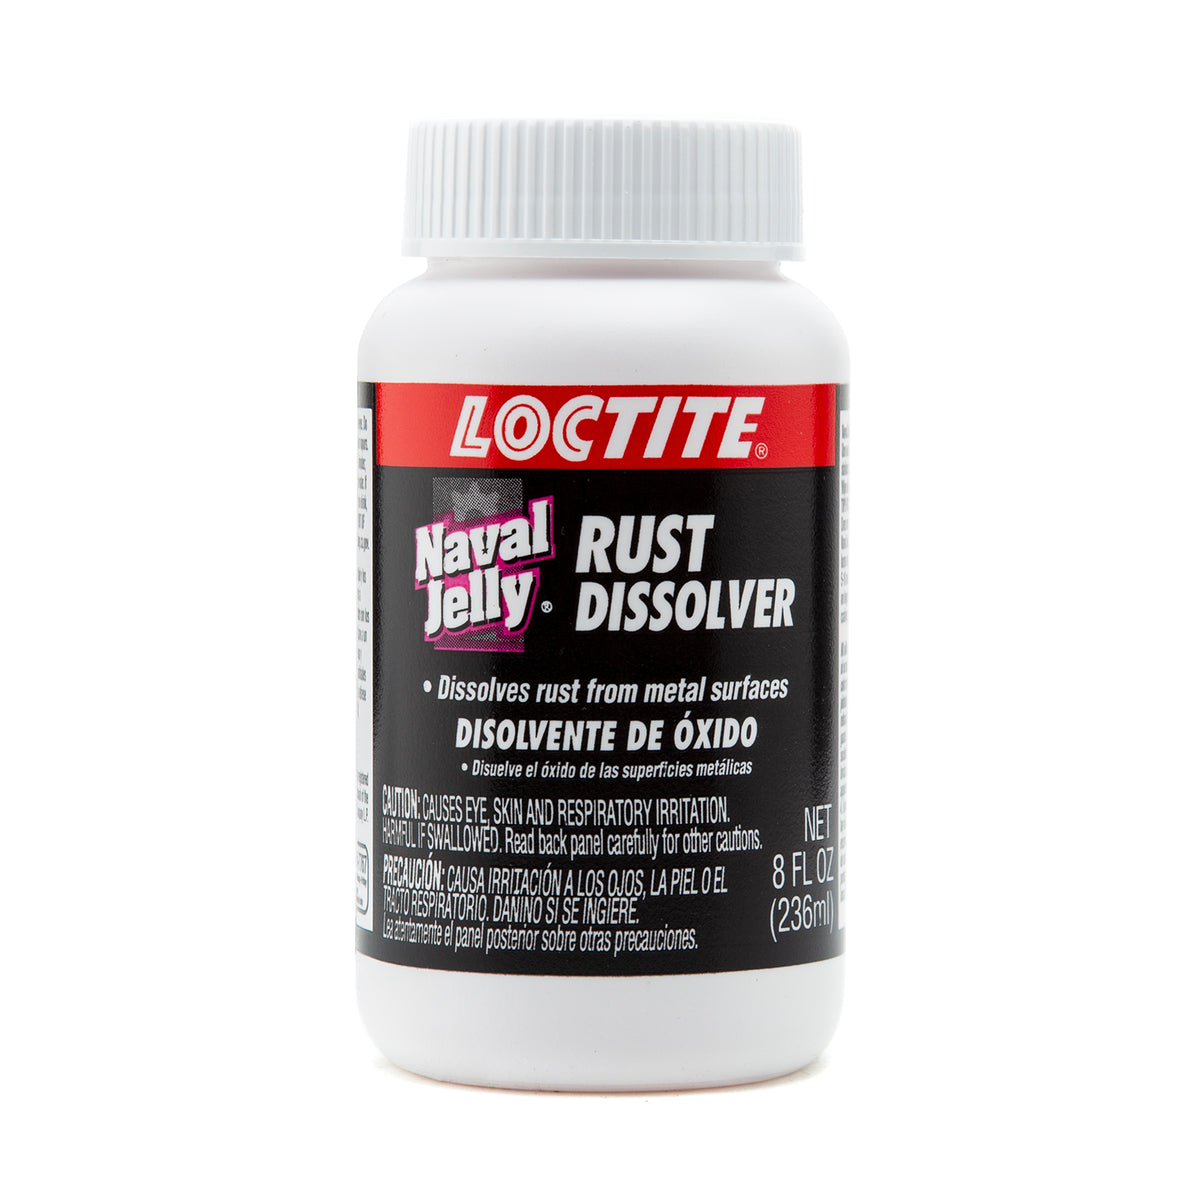 Loctite Naval Jelly Rust Dissolver, Pack of 1, Pink 16 fl oz